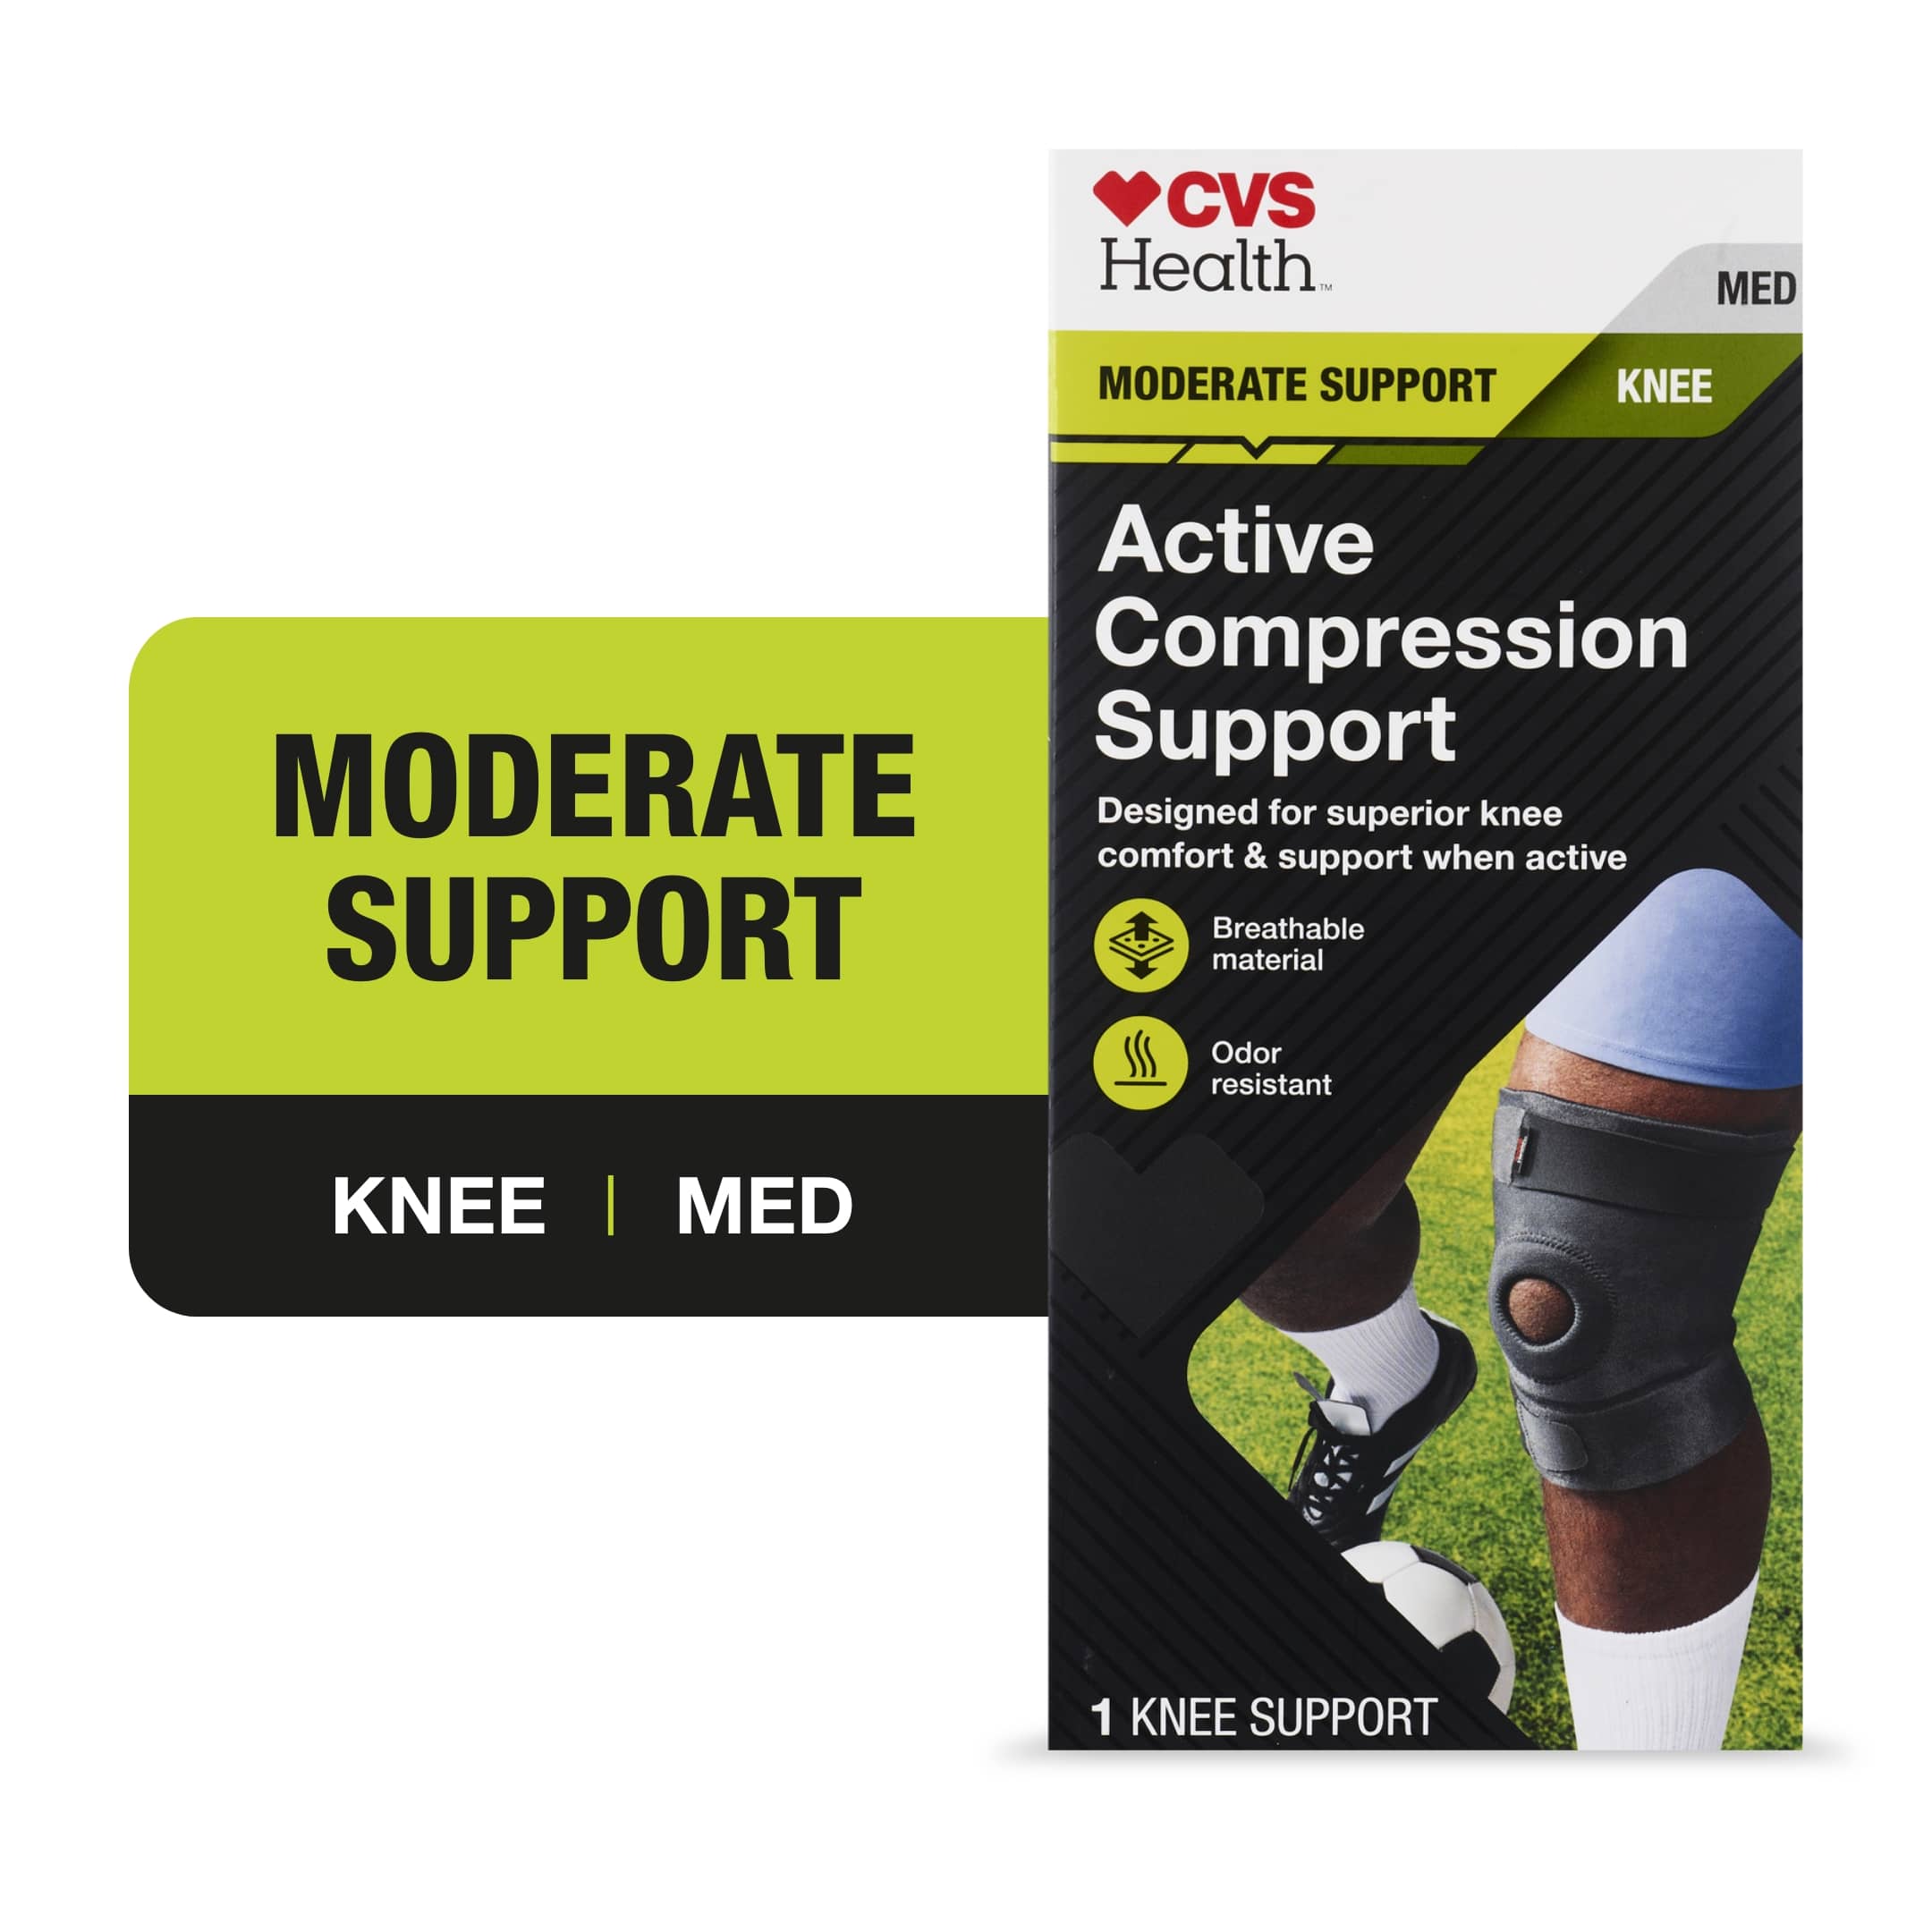 CVS Health Knee Moderate Knee Active Compression Support